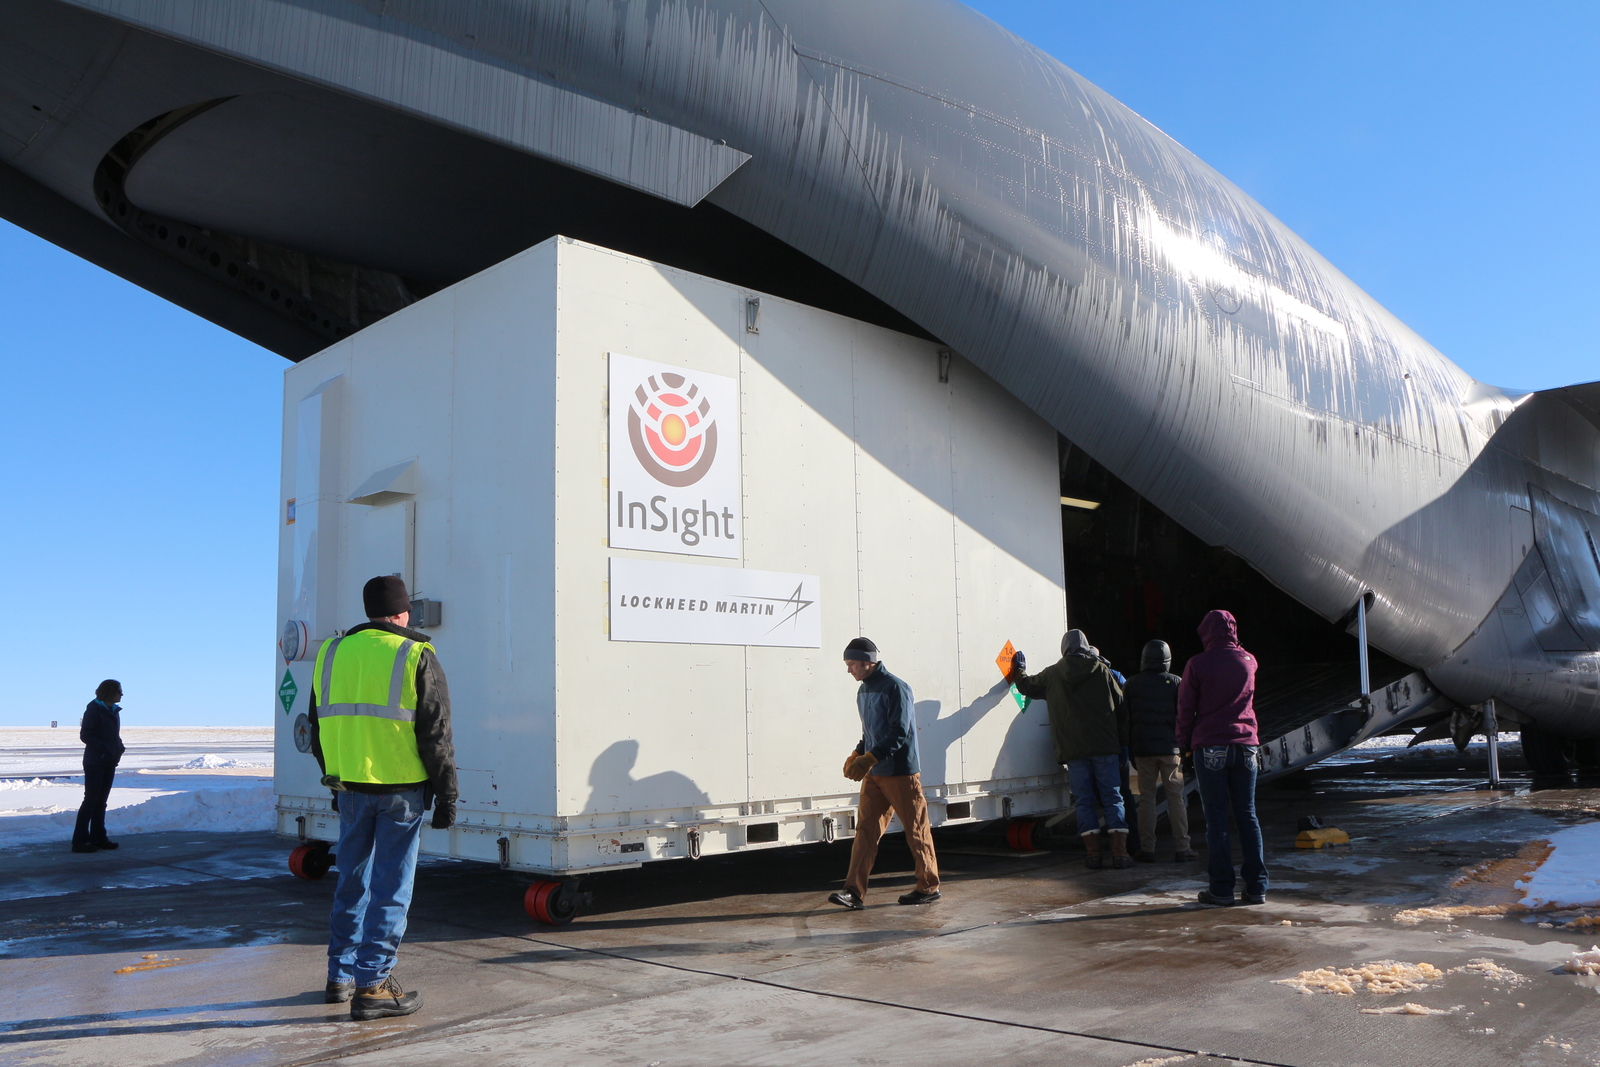 A crate containing NASA's Mars-bound InSight spacecraft is loaded into a C-17 cargo aircraft at Buckley Air Force Base, Denver, for shipment to Vandenberg Air Force Base, California.